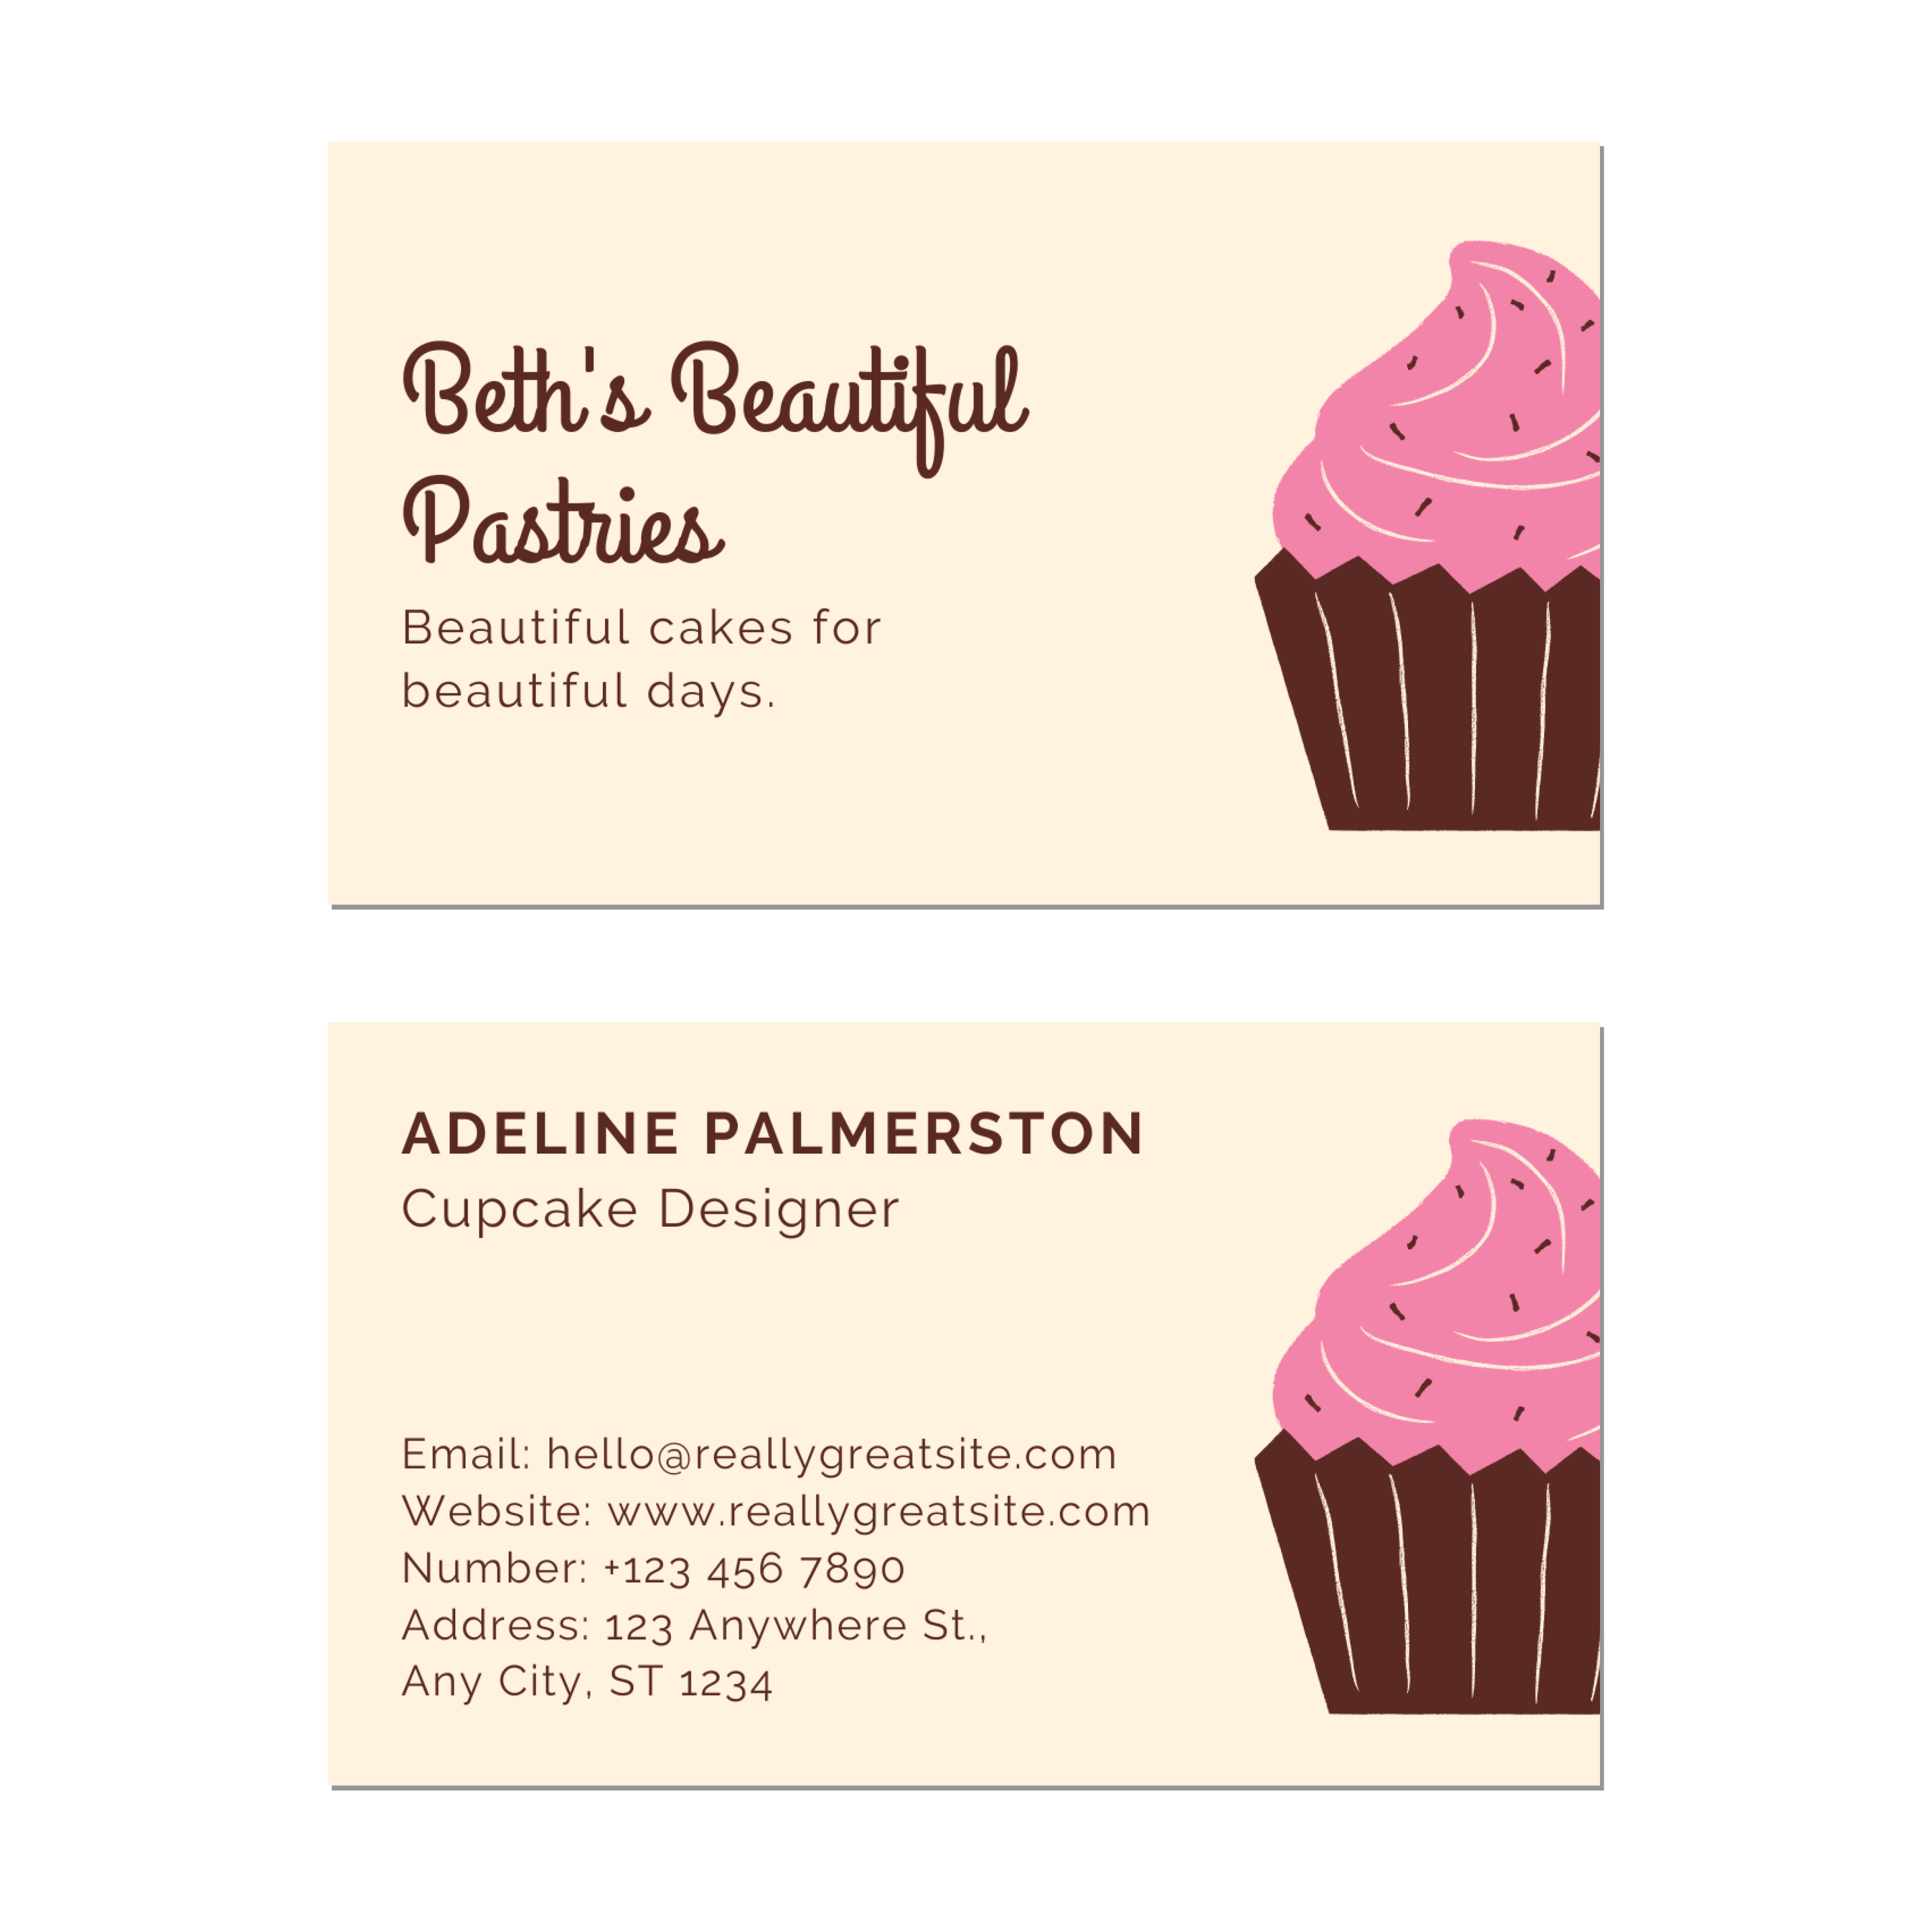 Cupcakes &amp; Pastries - Business Card Template - Two Side